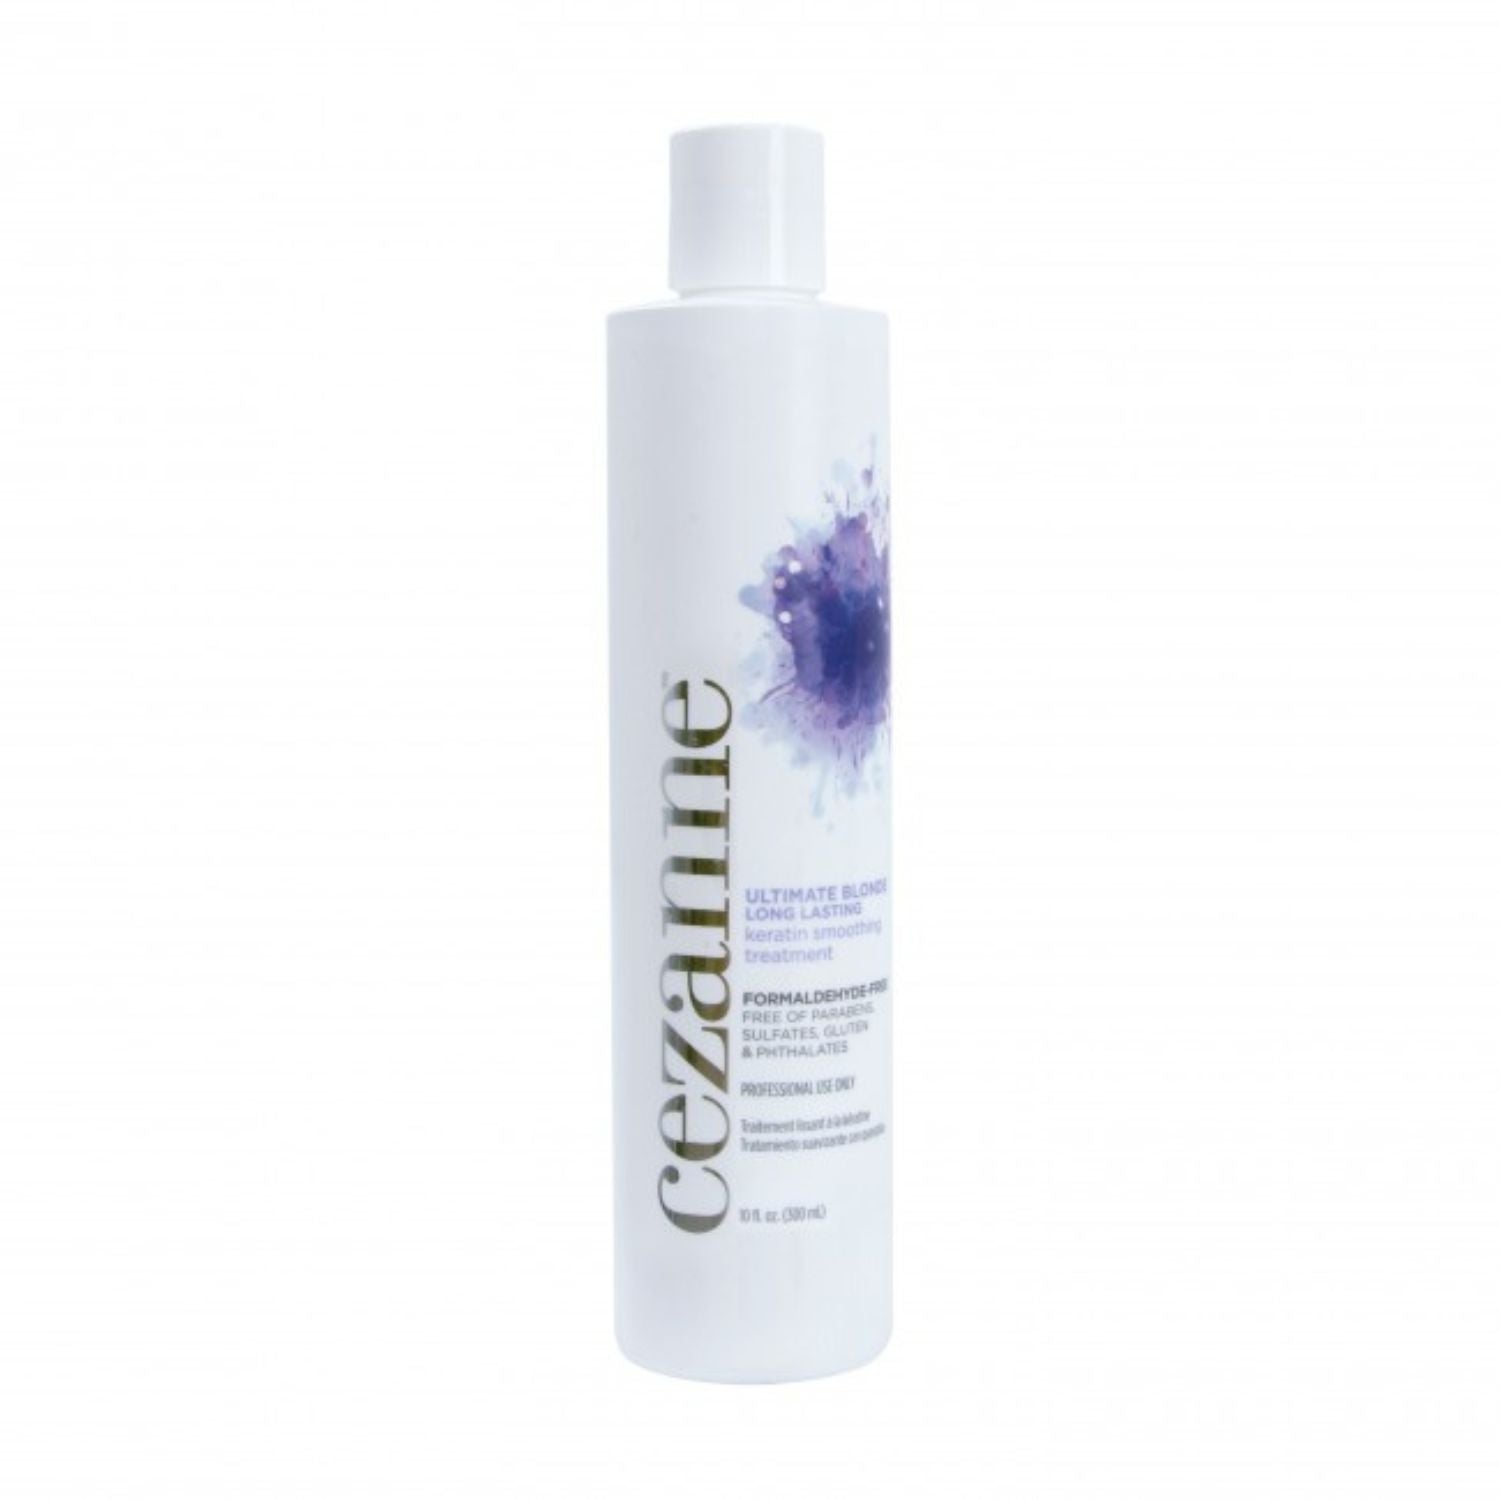 Cezanne Shampooing Blond Ultime 250ml